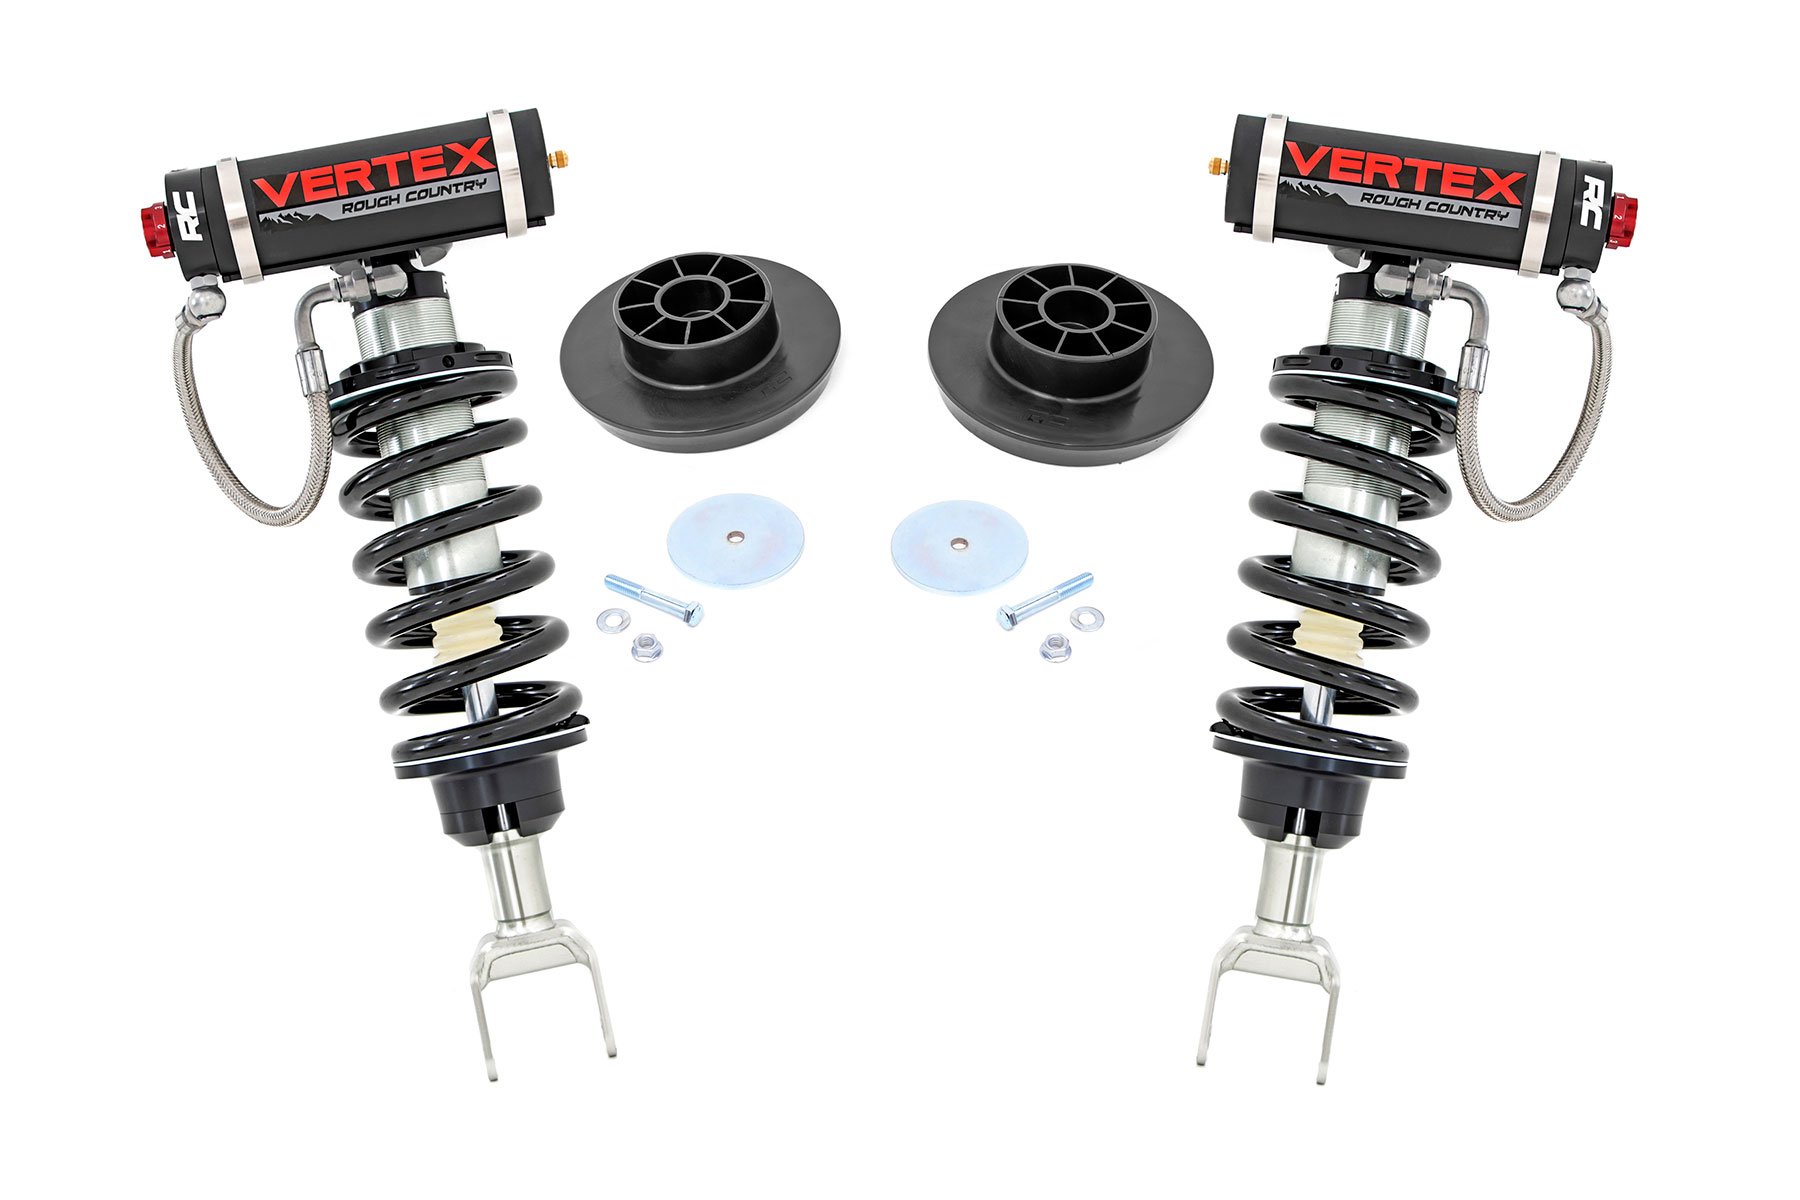 Dodge Ram 1500 Lift Kit - 2 Inch - Vertex Coilovers - 4WD (2012-2018 & Classic)